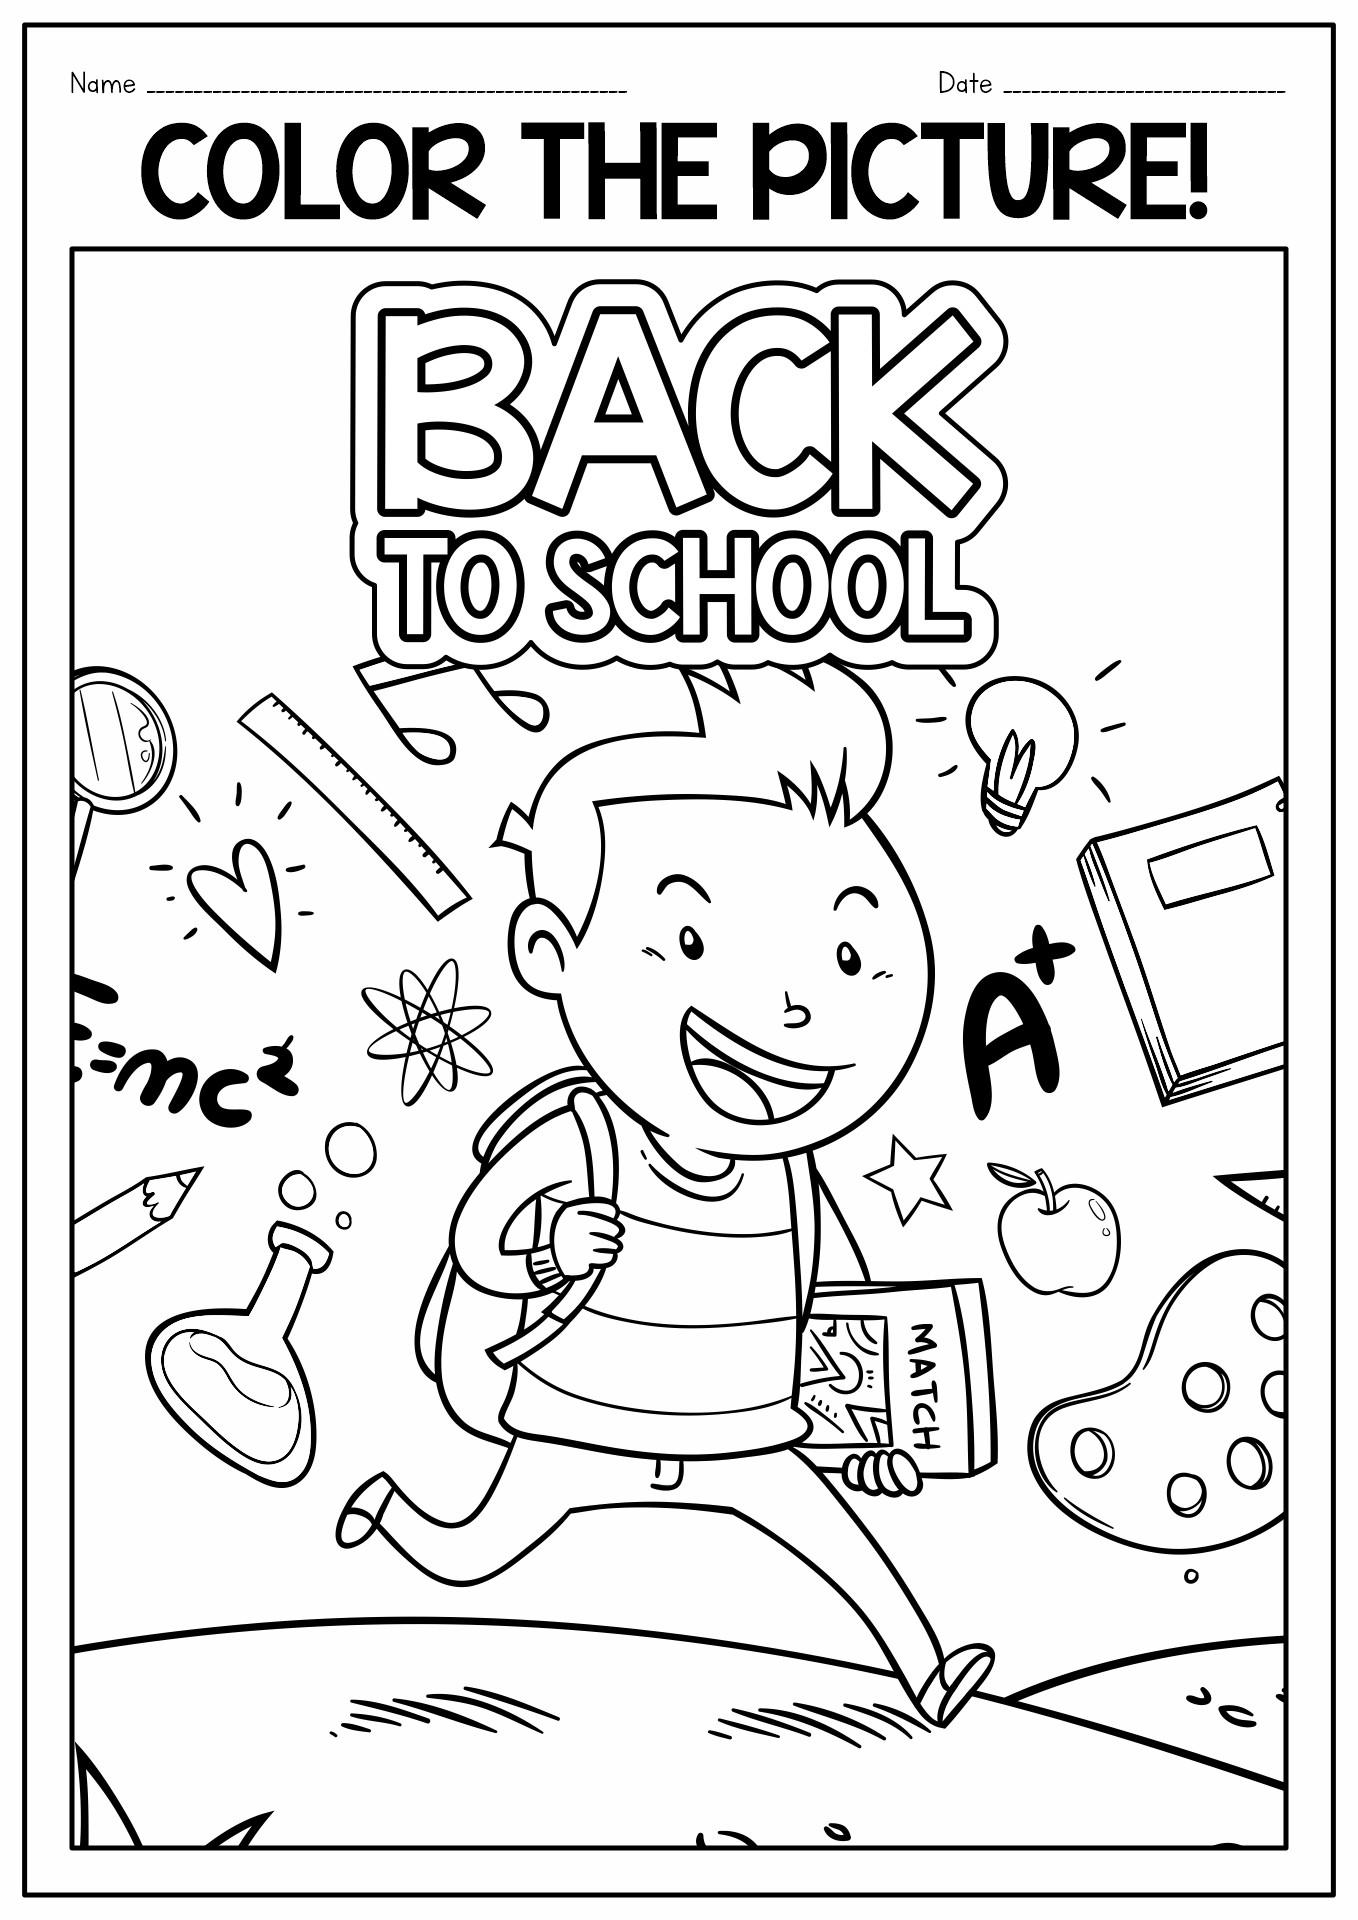 Back to School Coloring Sheets Printable Image